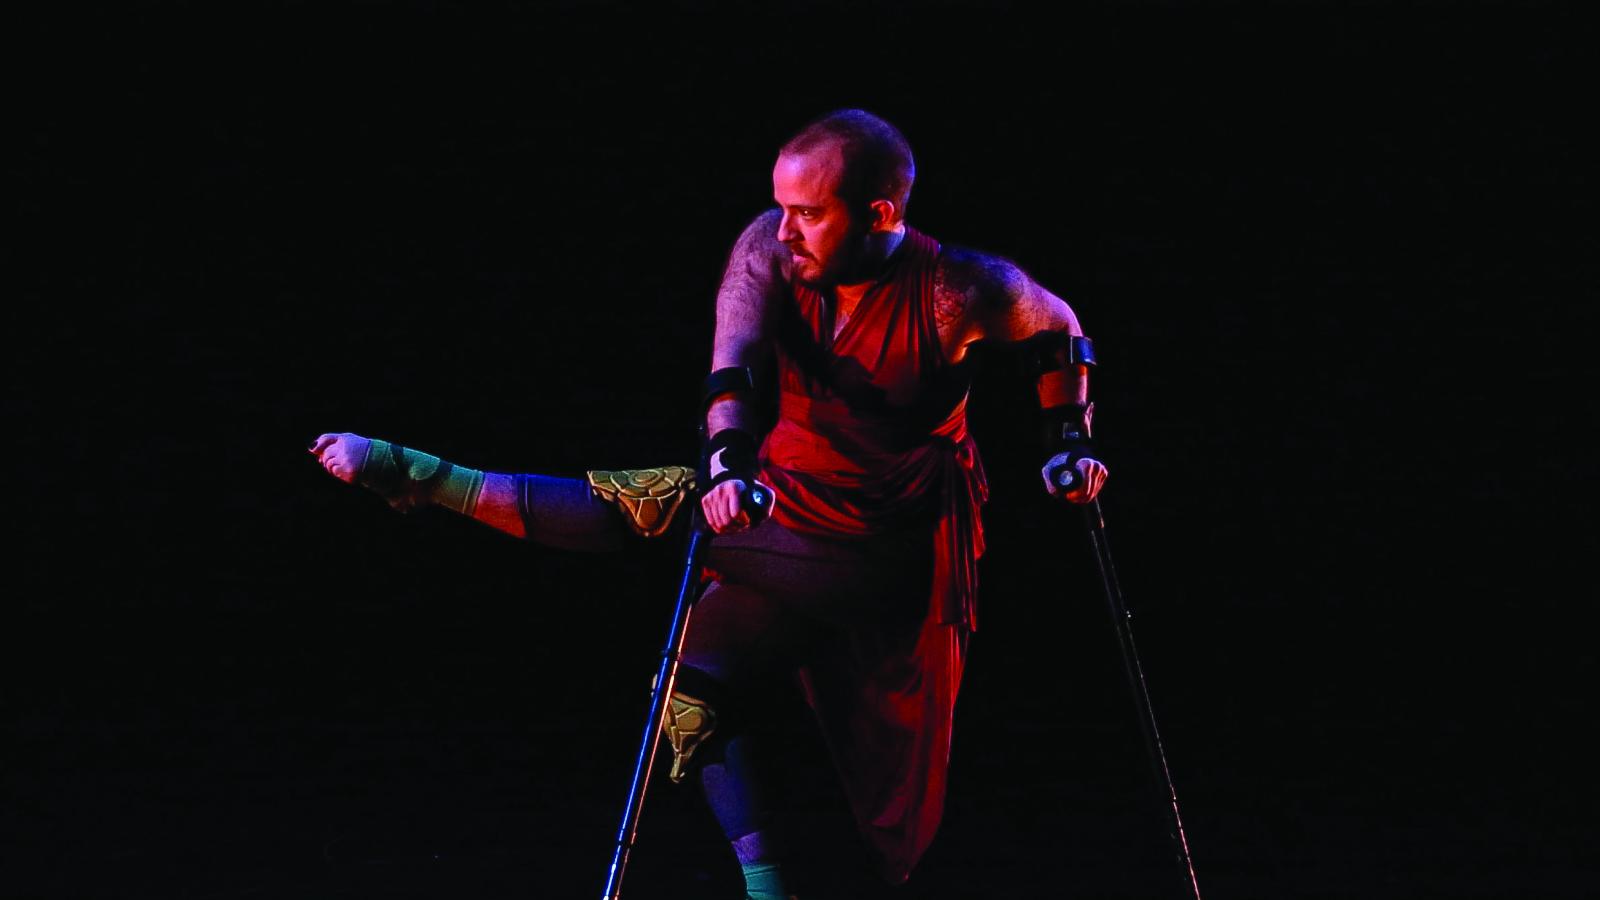 Man with short hair and beard on crutches dancing on stage. 